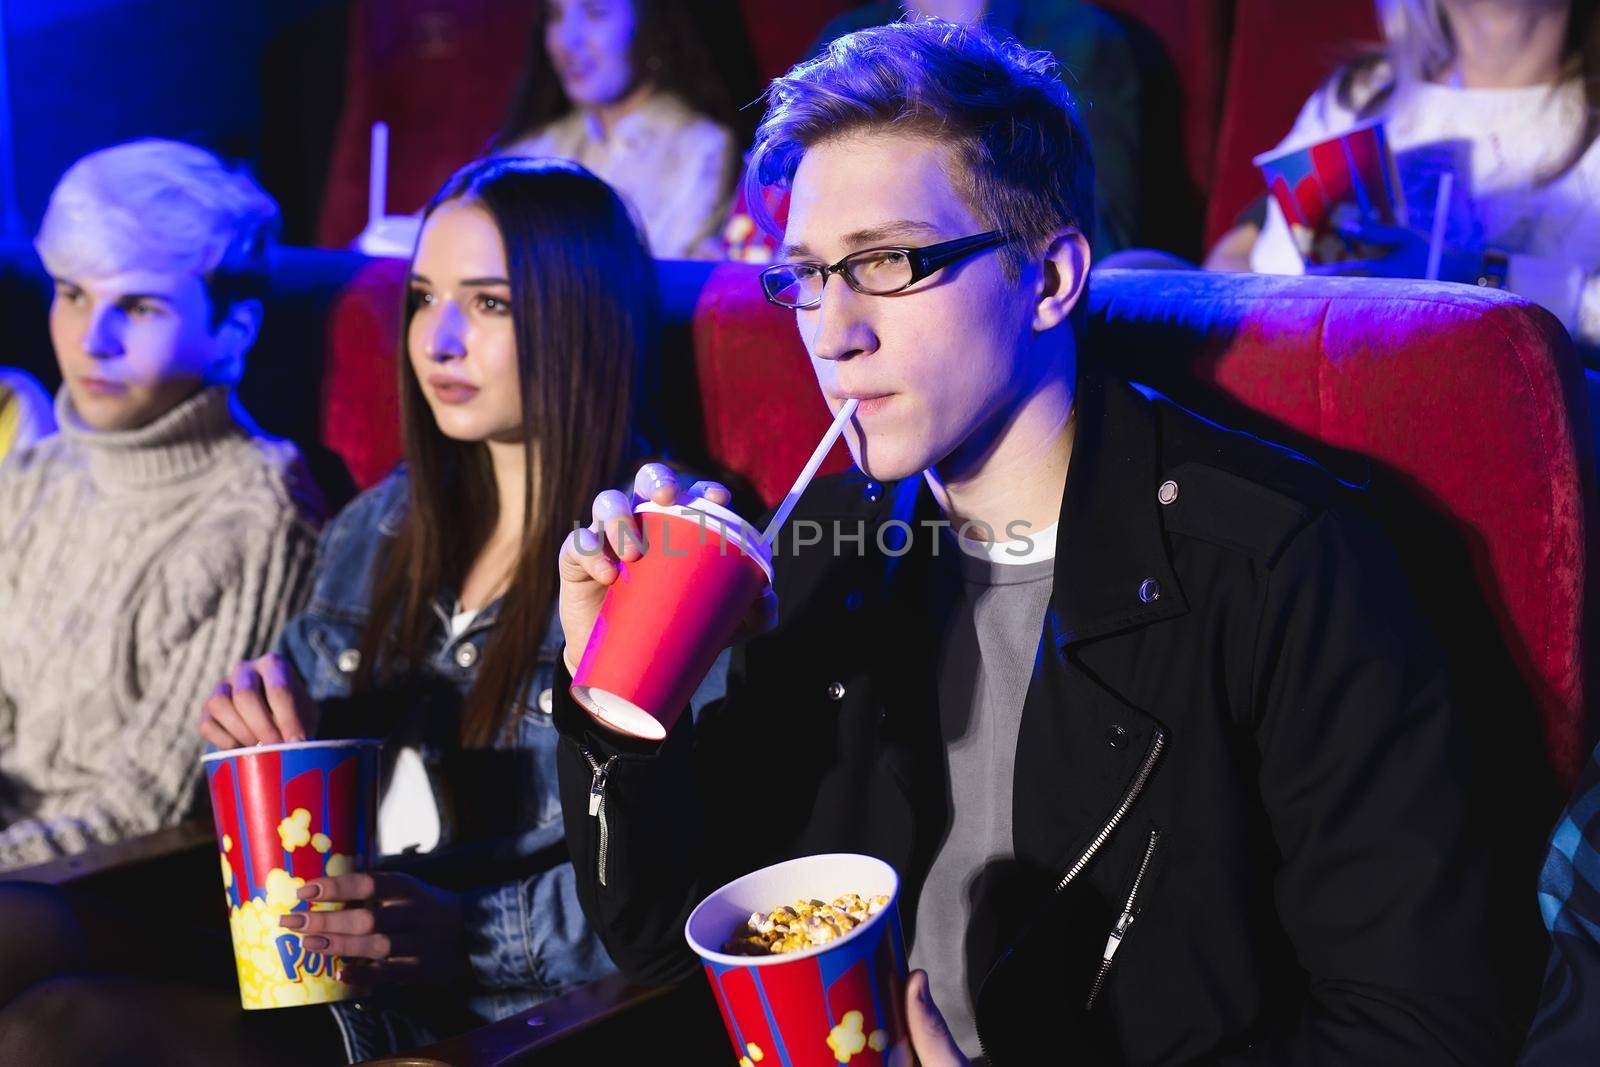 Young man drinks from a red Cup in the cinema by StudioPeace